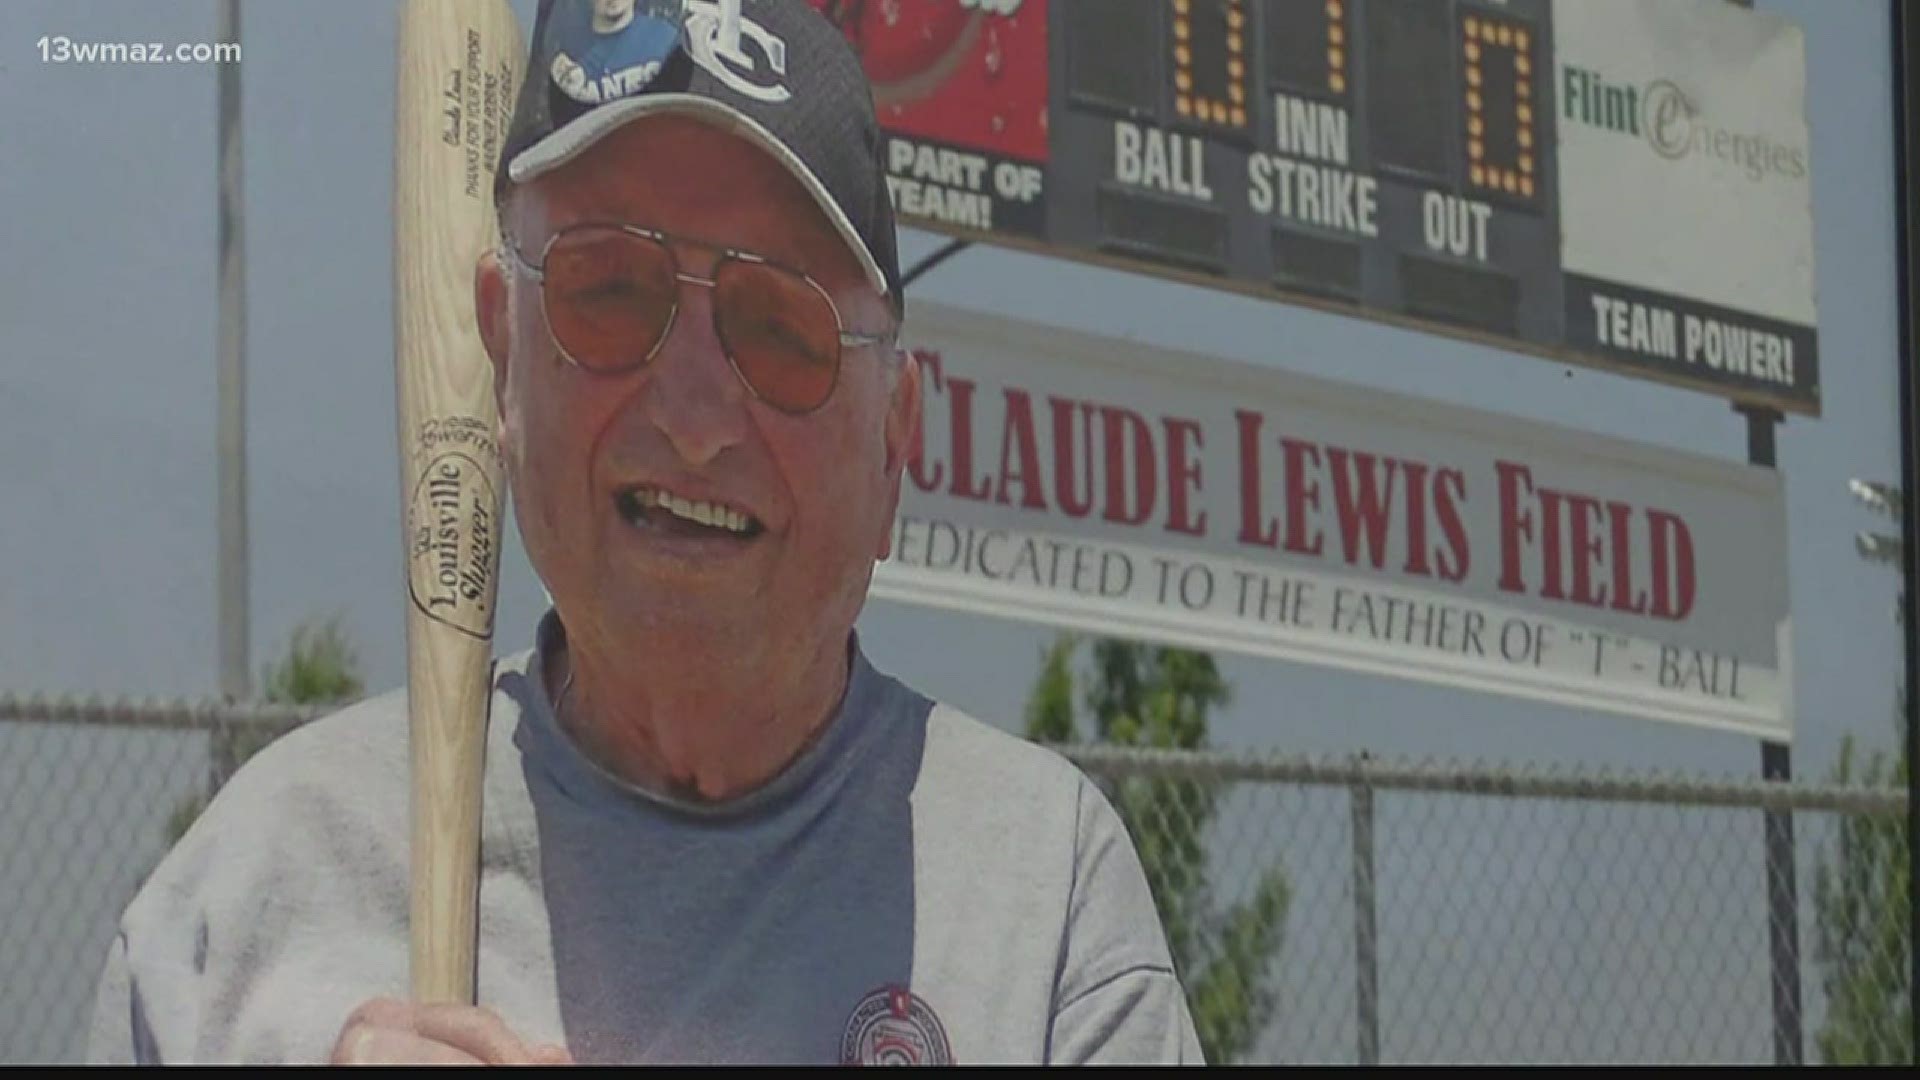 Claude Lewis is also known as being the father of "tee ball" in the International City. He is credited as an inventor of the sport after he organized a league.